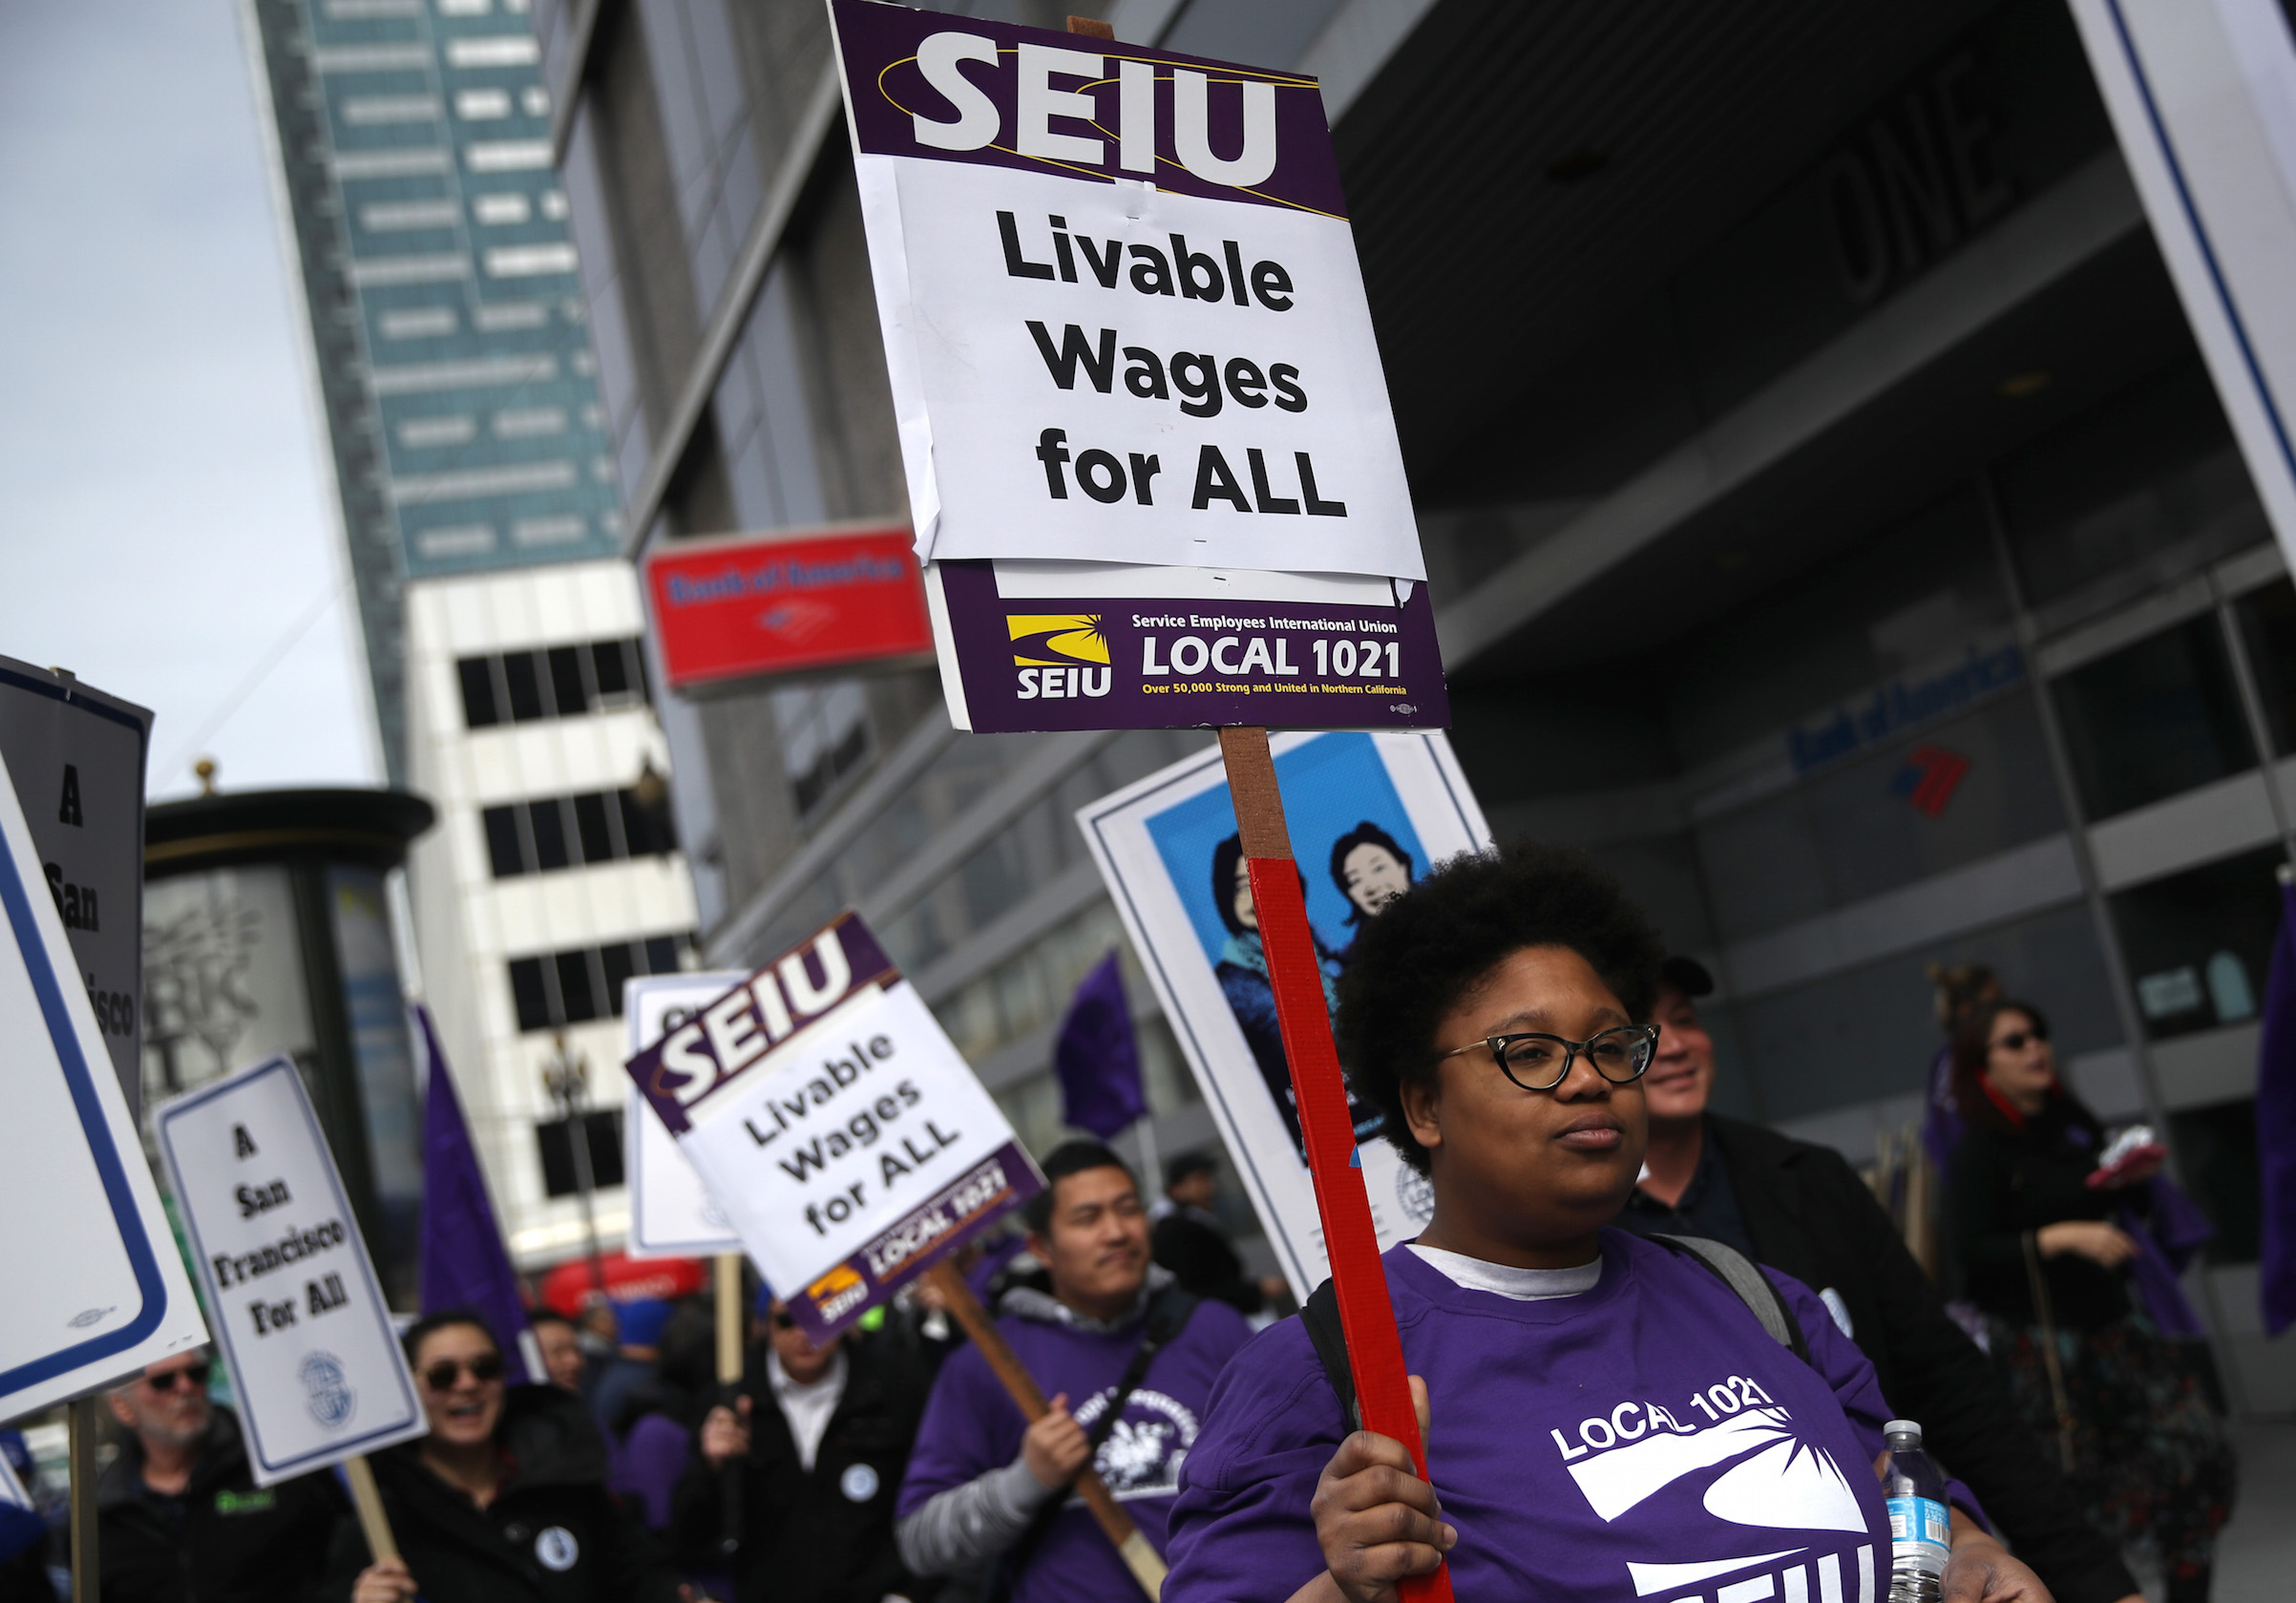 San Francisco city workers carry signs as they march during a rally outside the City and County of San Francisco Human Resources office on March 7, 2019, in San Francisco. Hundreds of San Francisco city workers staged a rally to demand a fair contract that addresses pay equity for women. Public-sector employment is a major factor in the race and gender wage gap. (Justin Sullivan—Getty Images)